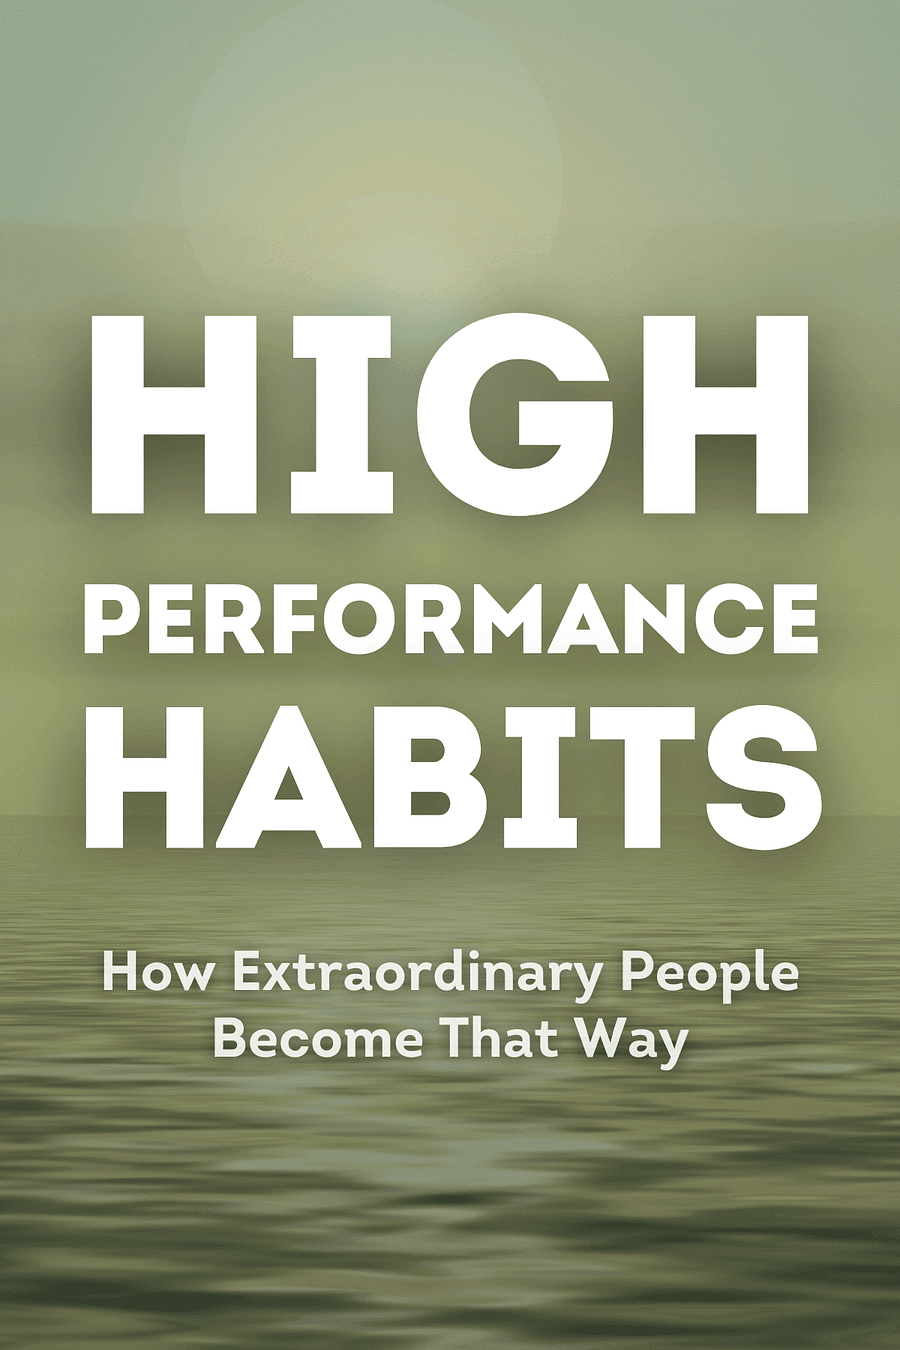 High Performance Habits by Brendon Burchard - Book Summary